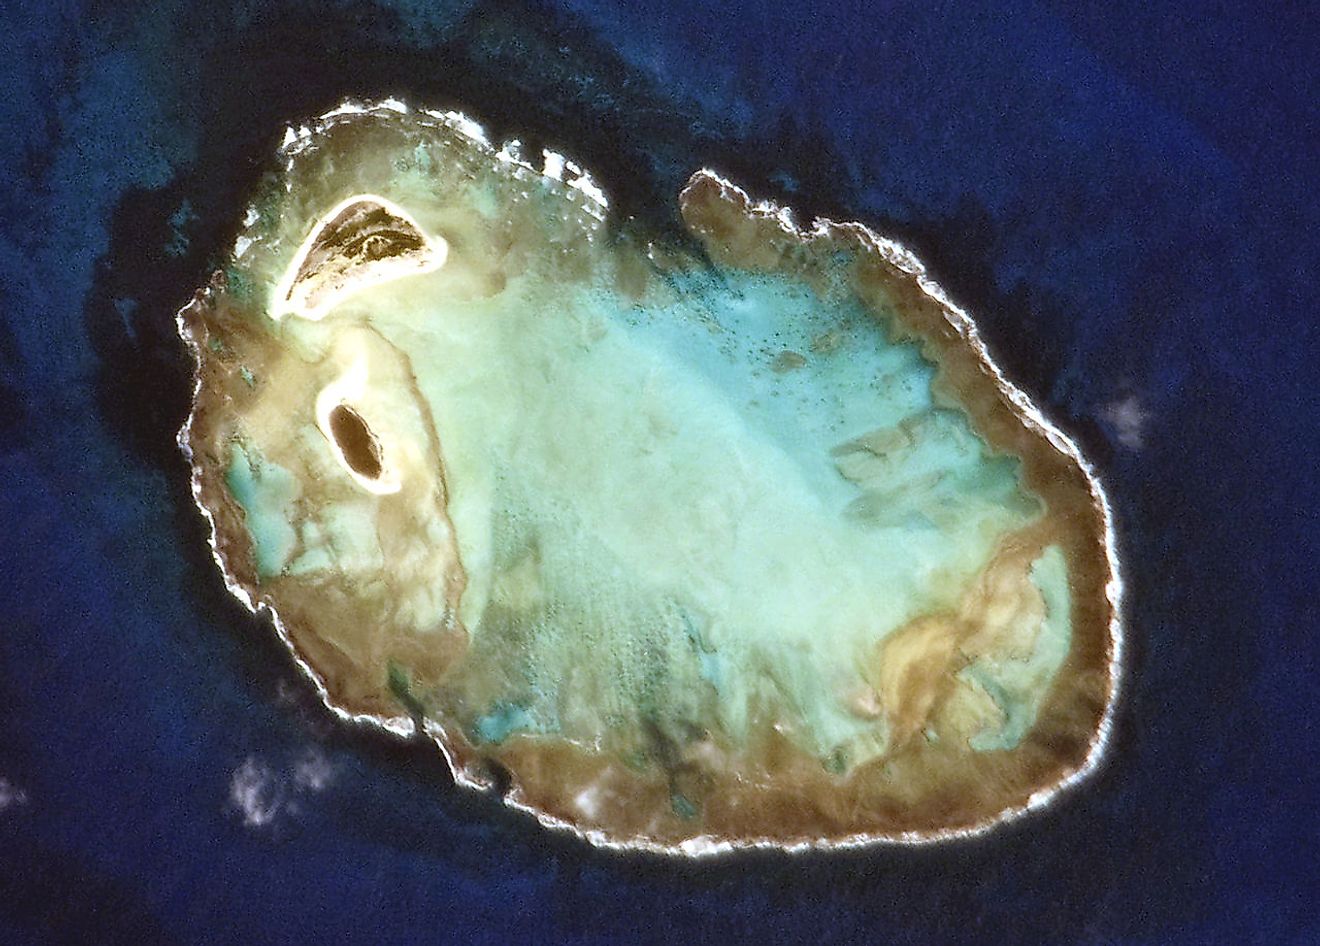 Rocas Atoll, Brazil, photographed from the International Space Station by the crew of Expedition 22. Image credit: Wikimedia.org